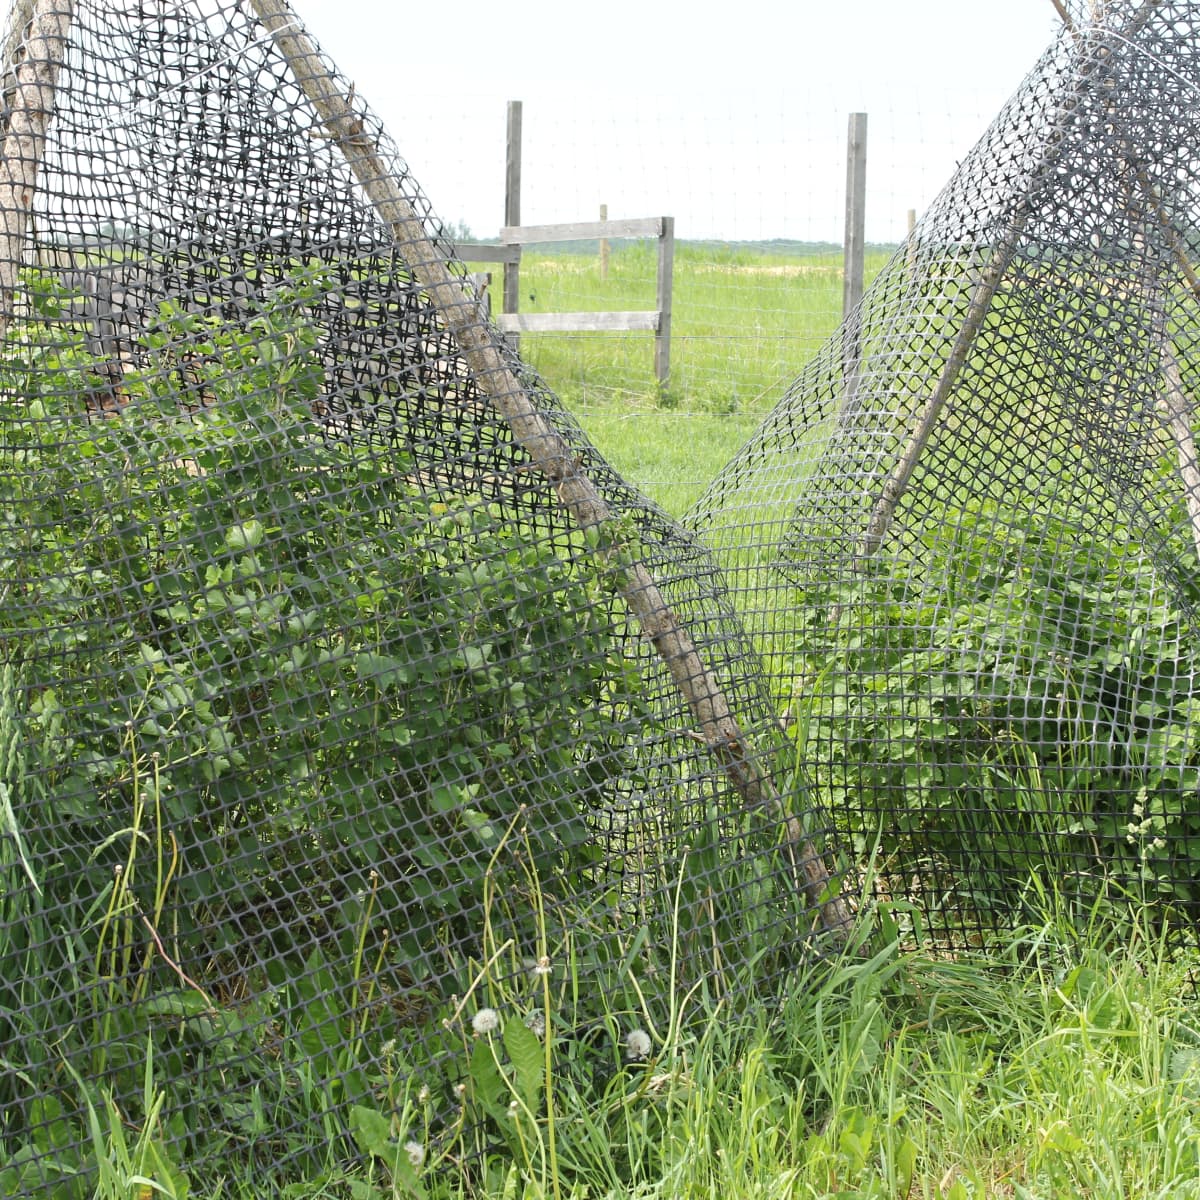 How to Build a Bird Net Teepee for Berries, Fruit, and More - Dengarden